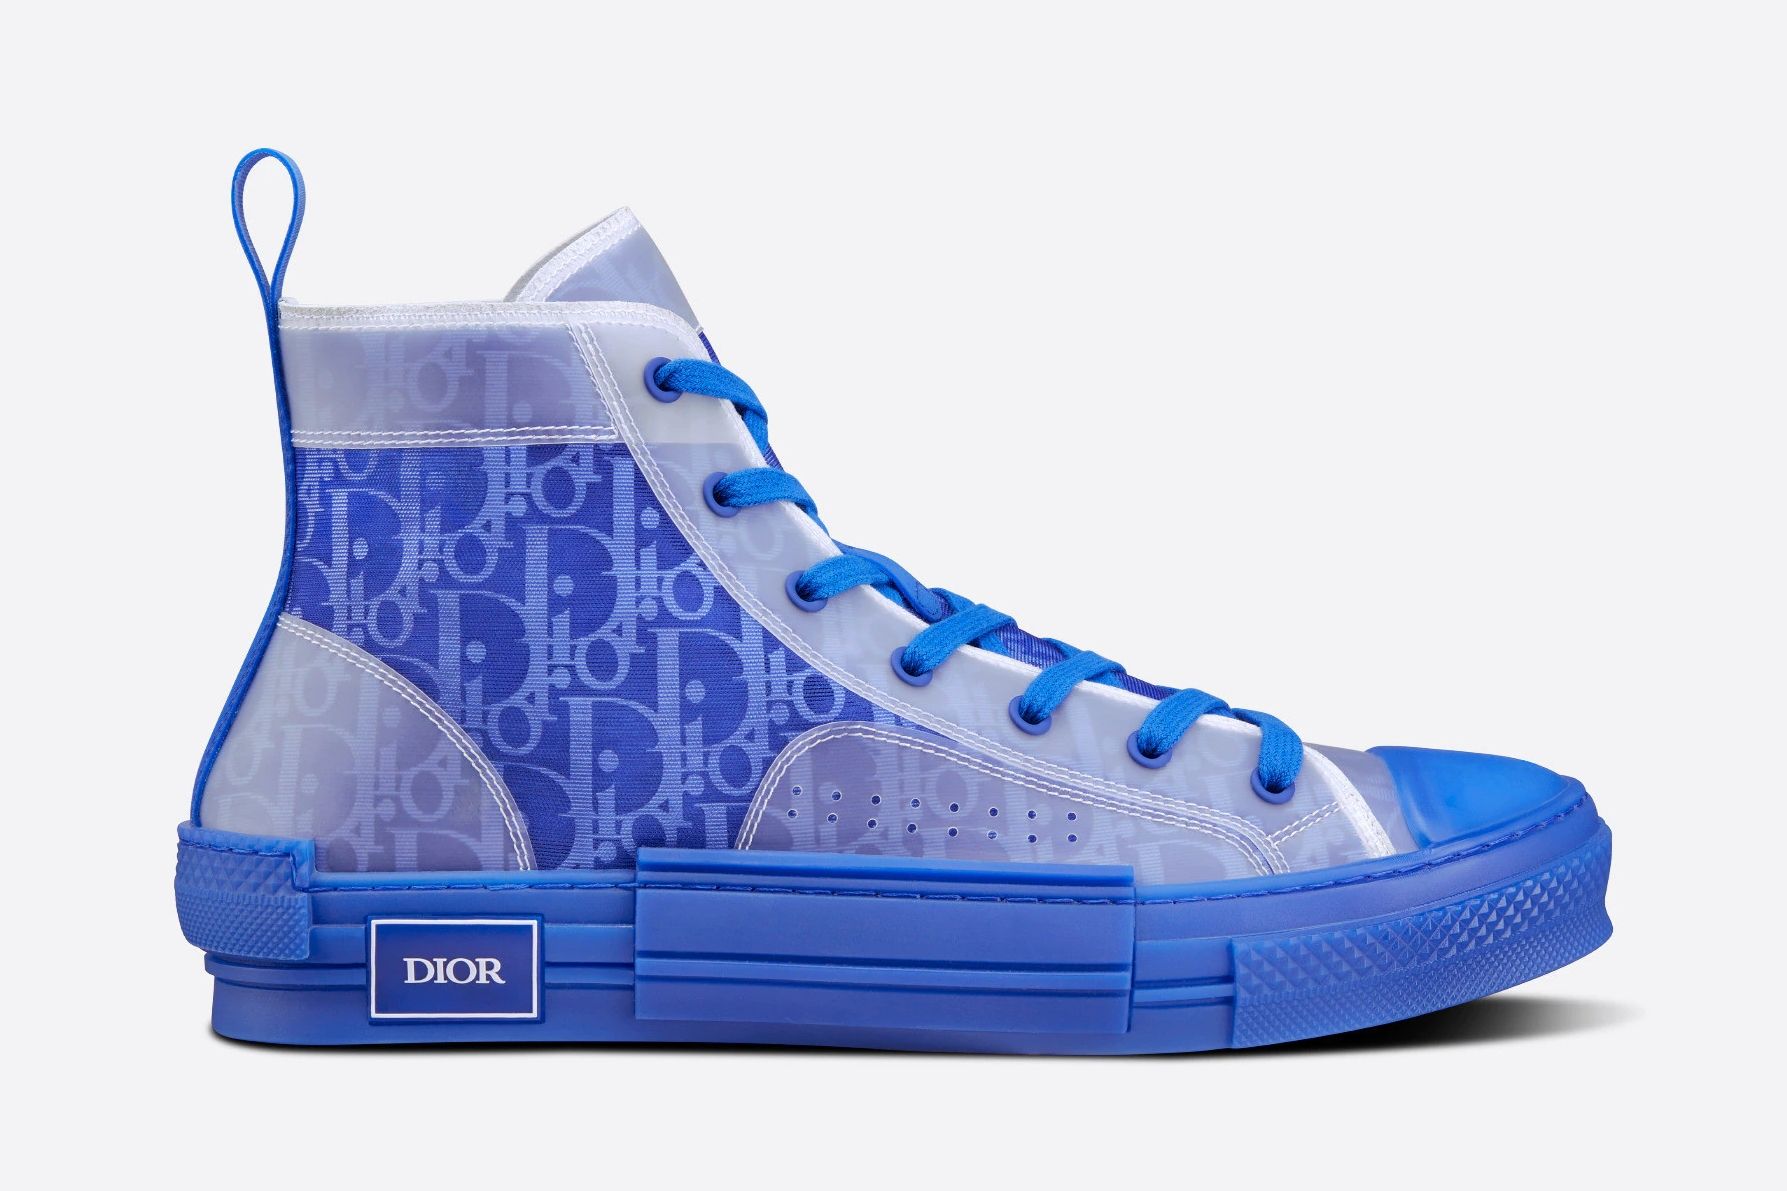 New sneaker drops in Singapore: Dior B23 sneakers in blue, and more